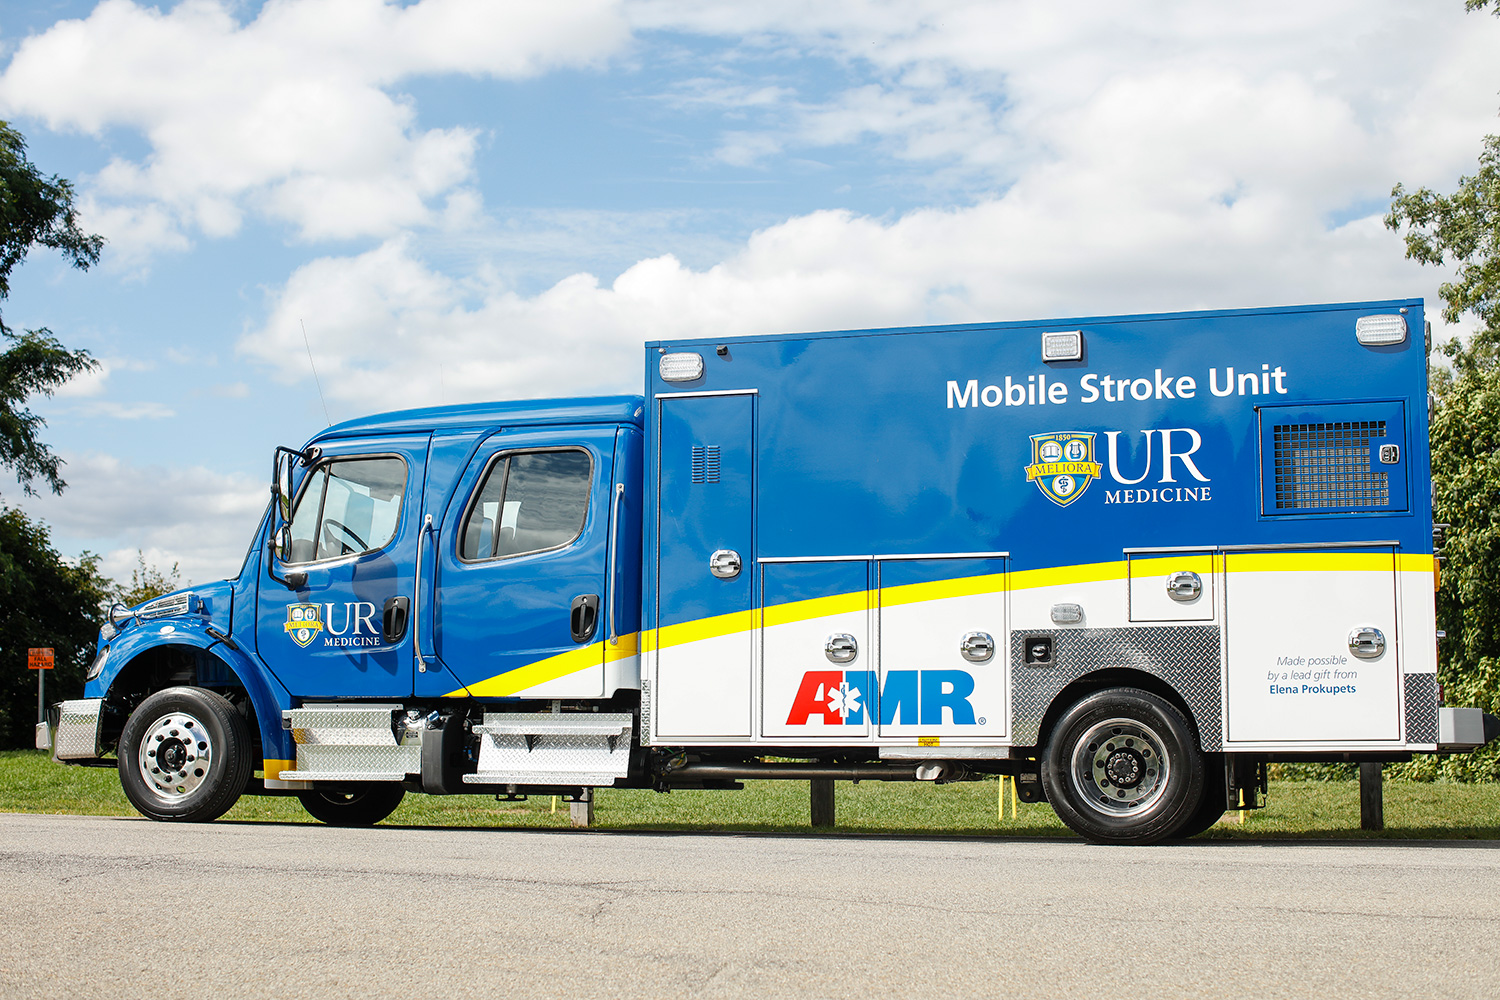 Mobile Stroke Unit: The first of its kind in the Western and Central New York, brings the resources of an emergency room directly to the stroke victim’s driveway.